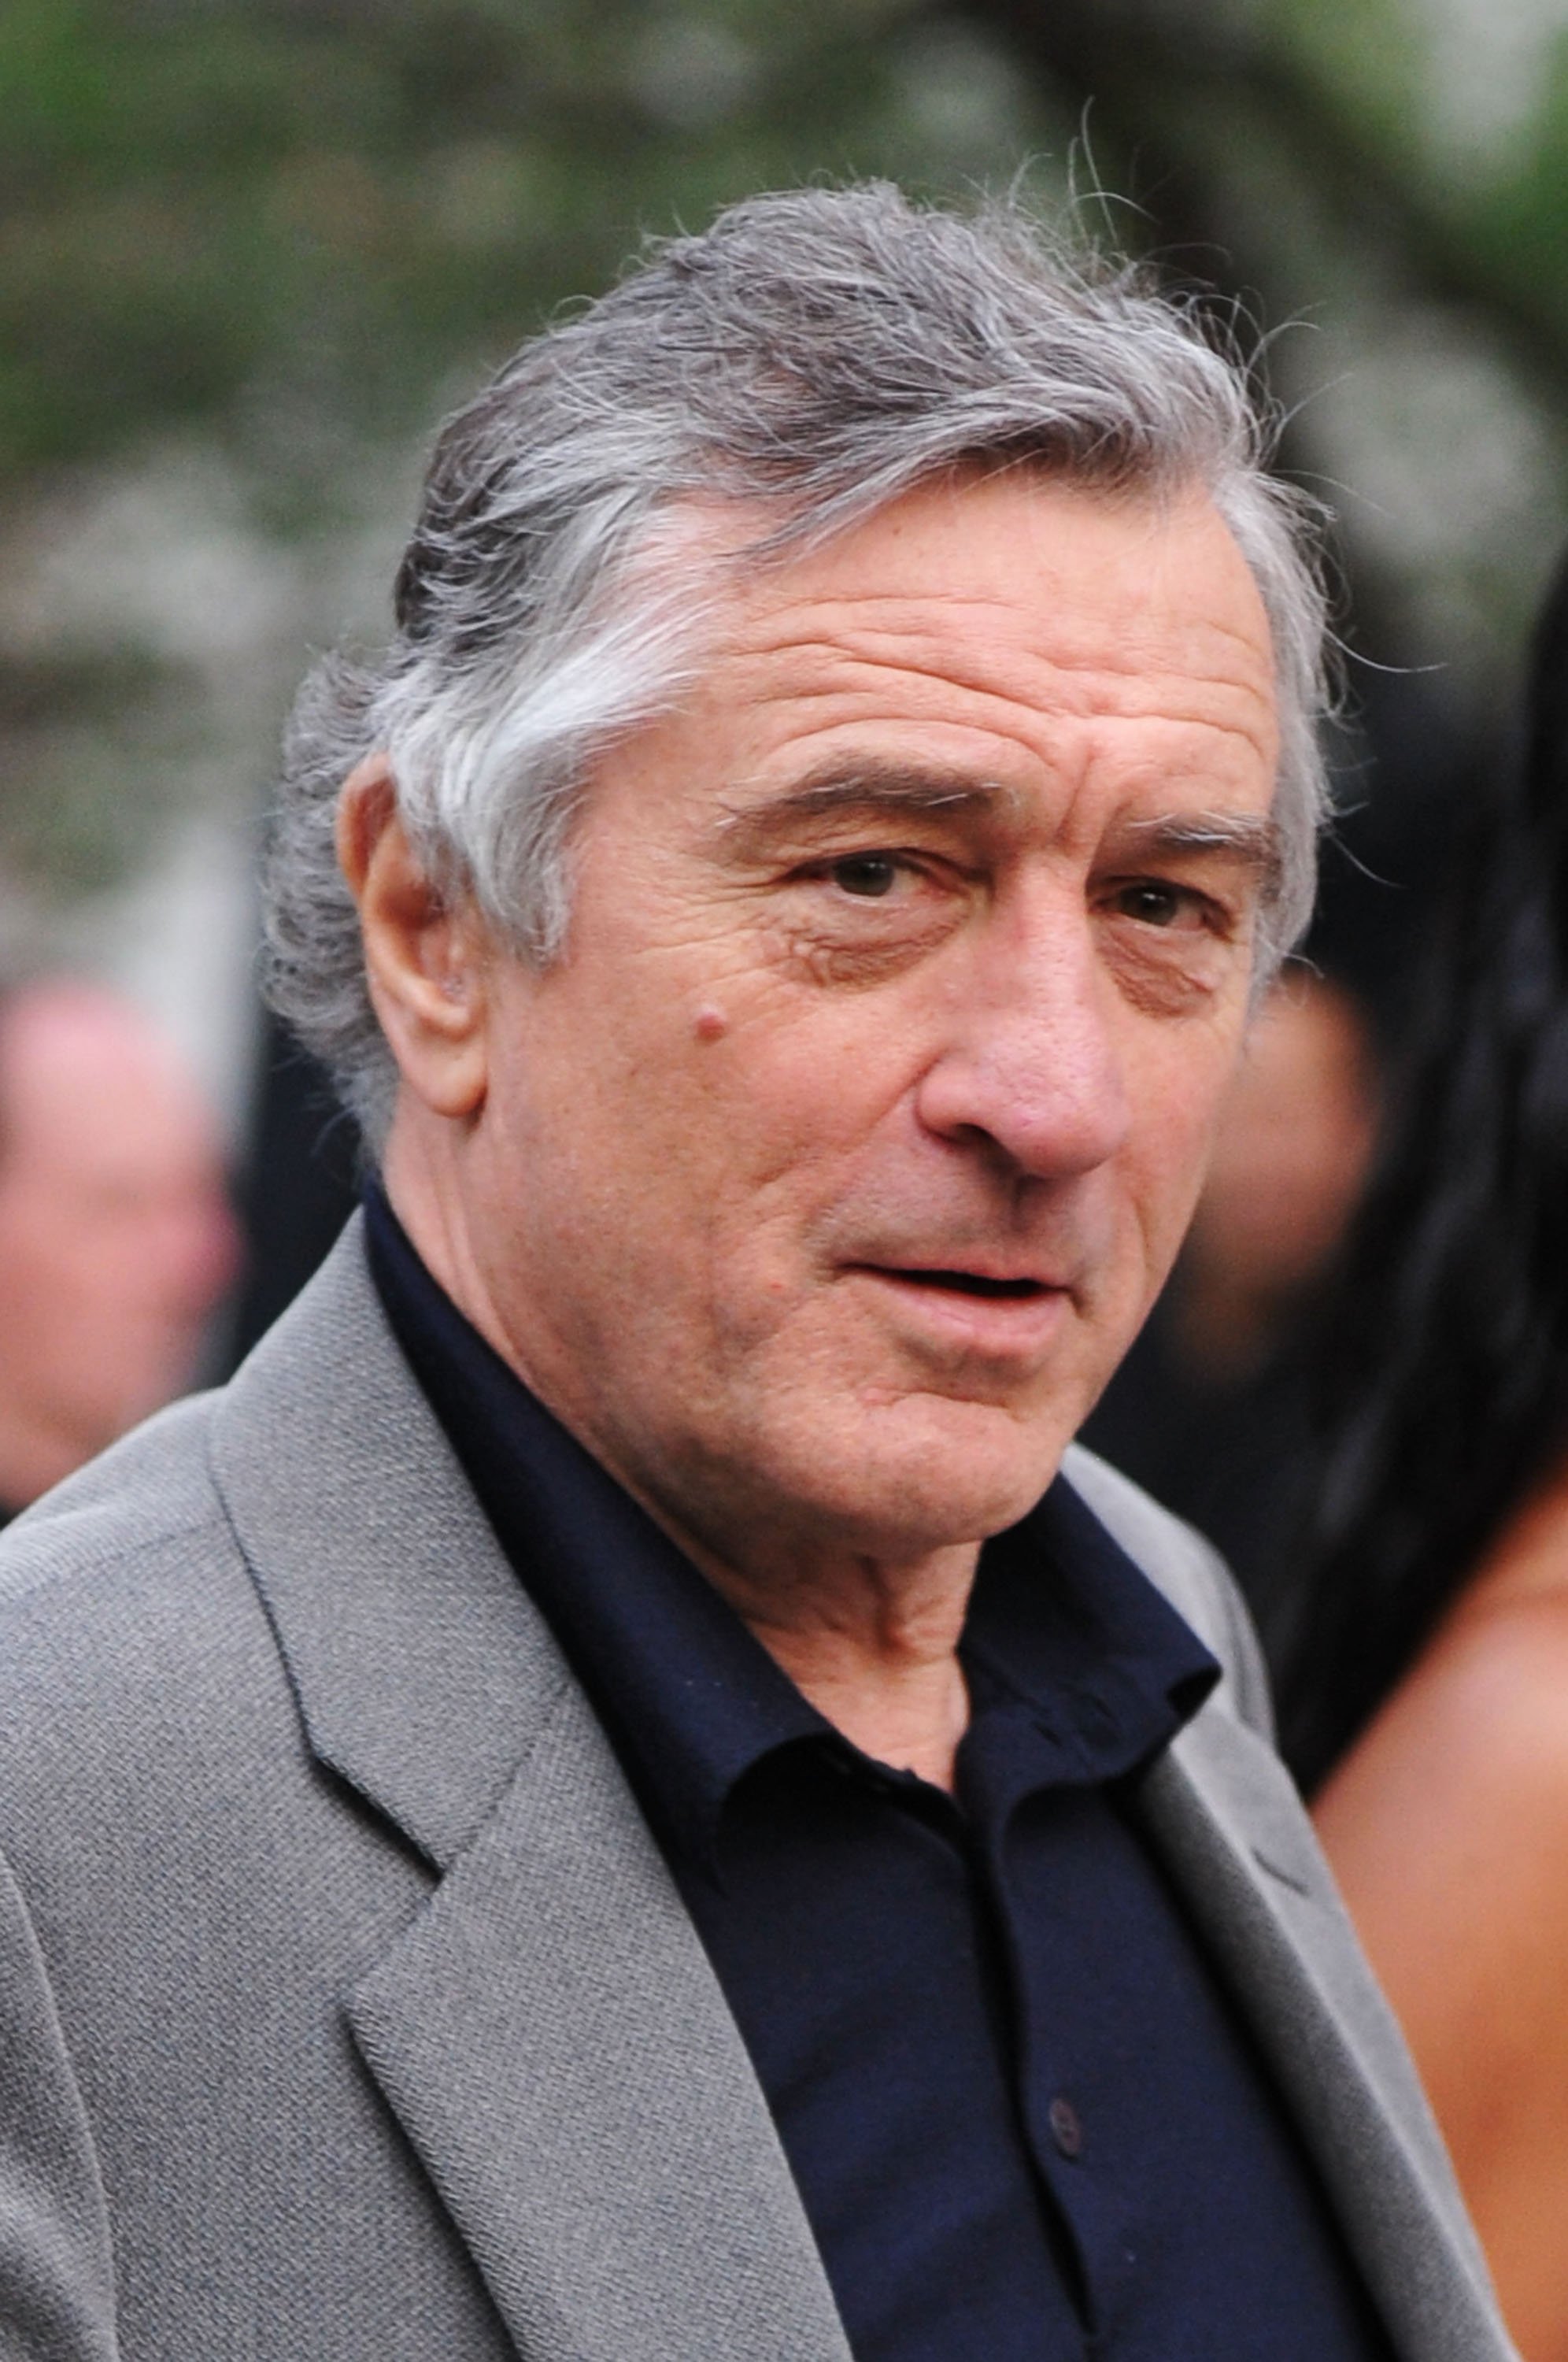 Robert De Niro attends the Vanity Fair party on April 20, 2010 in New York City. | Source: Getty Images.